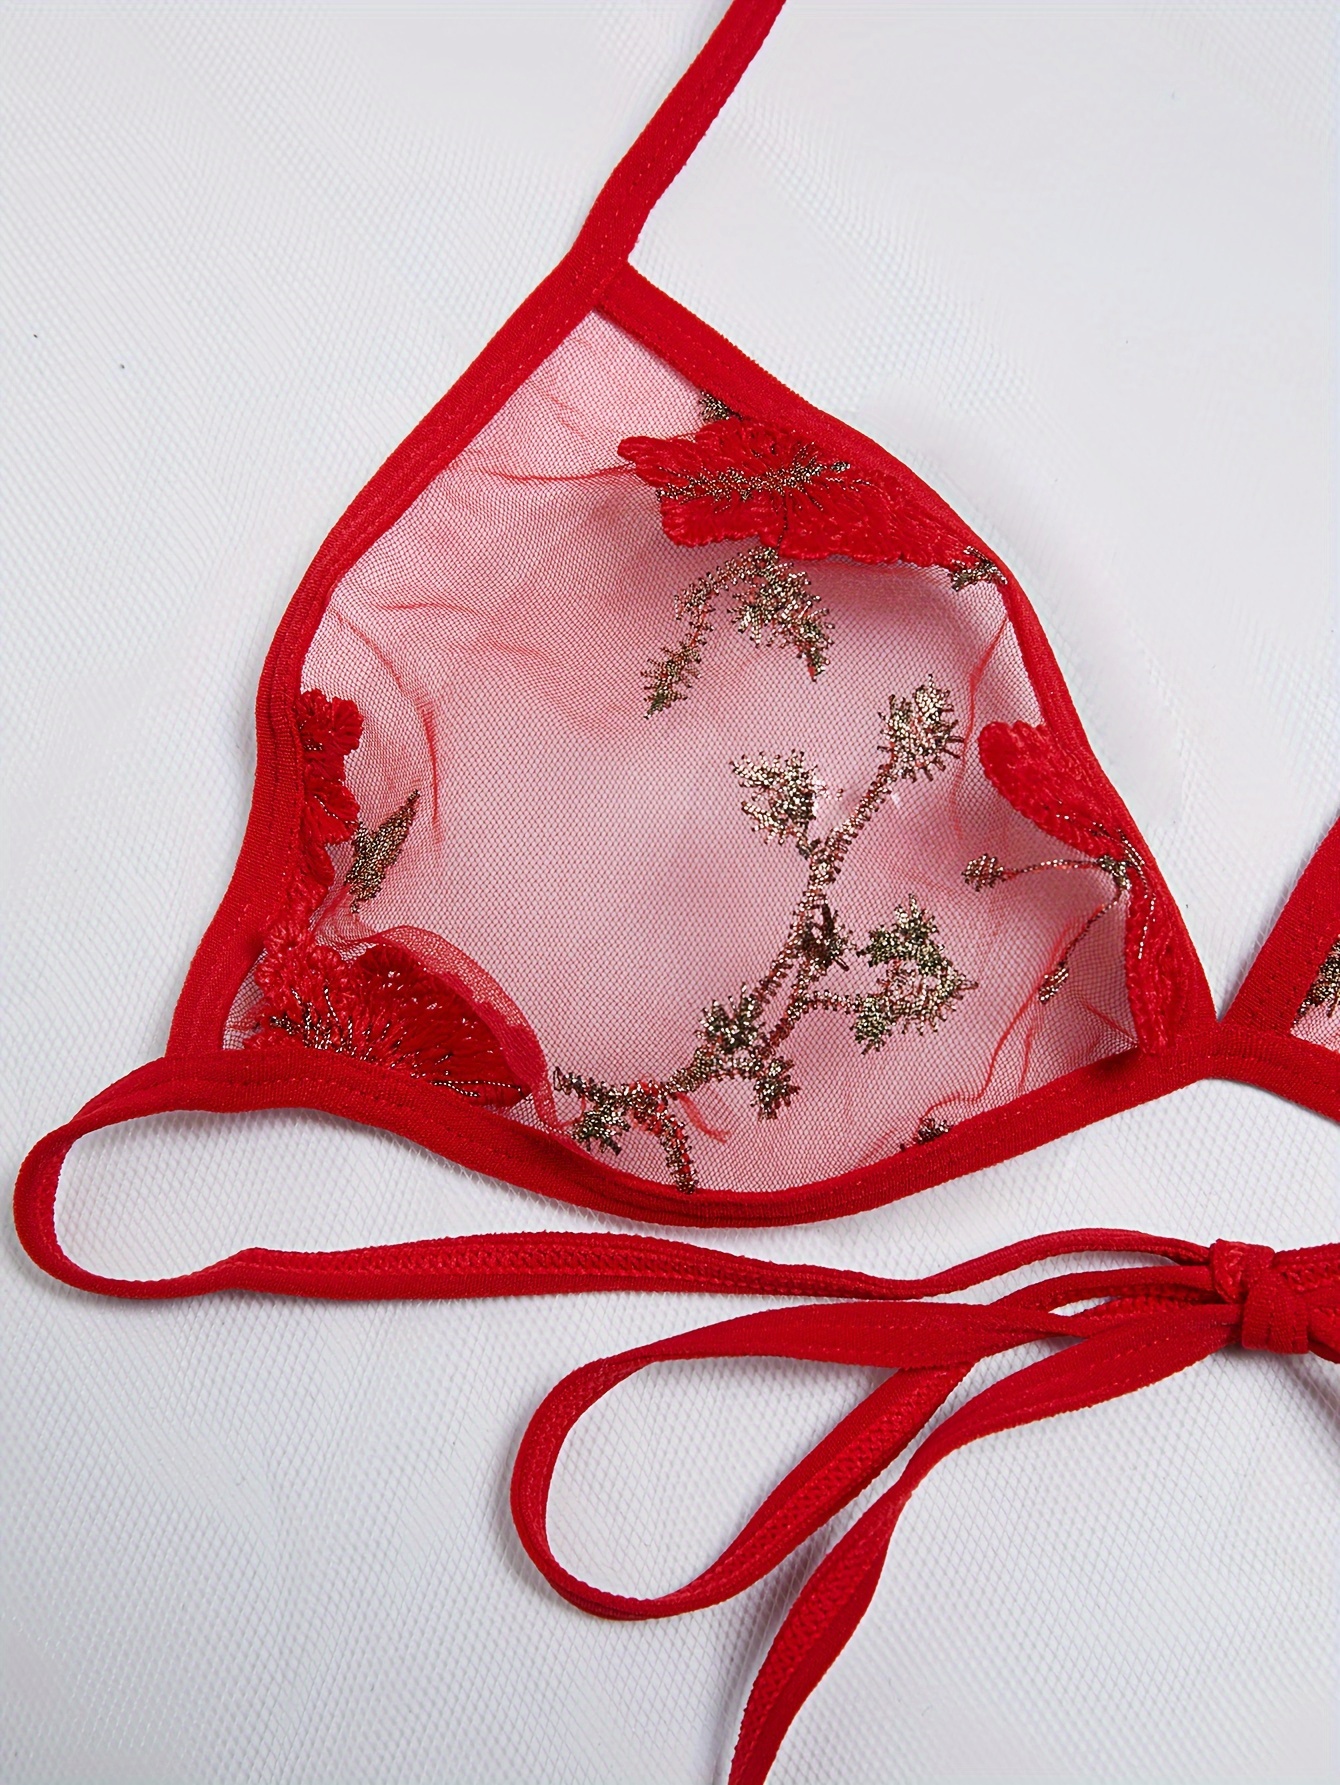 Floral Embroidery Bra & Side Tie Thong